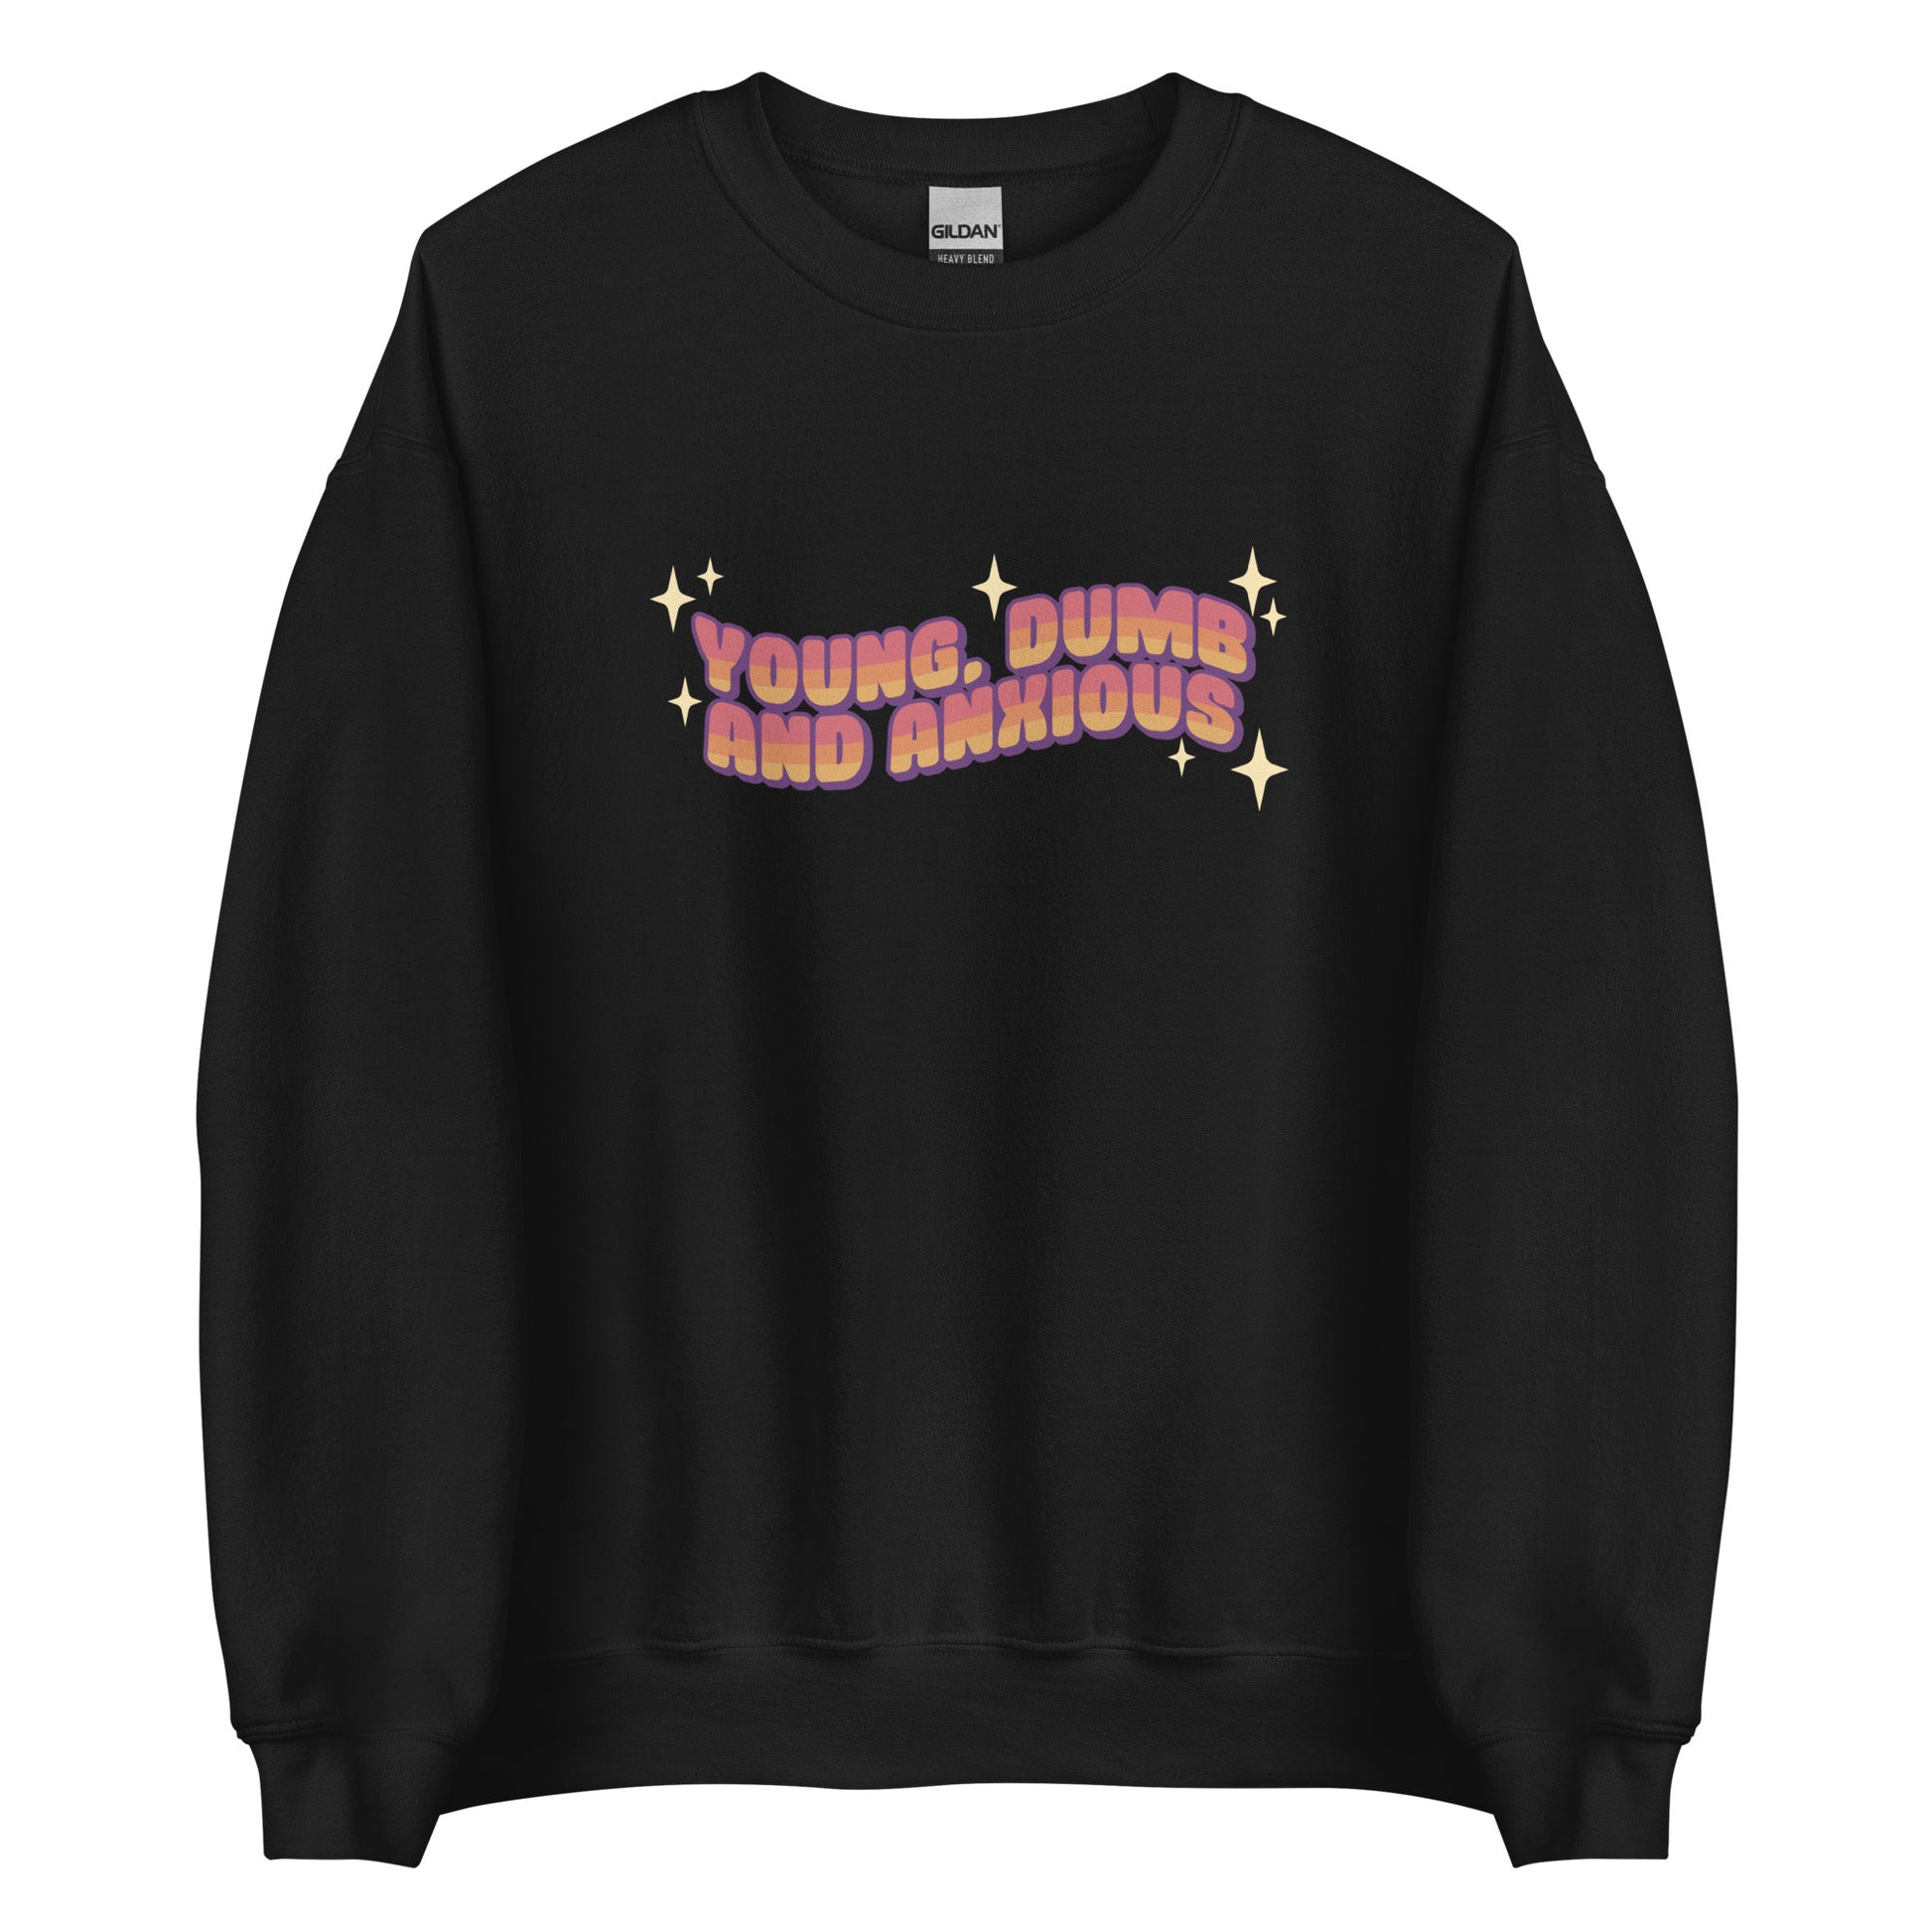 A black crewneck sweatshirt featuring text in a pink-to-yellow gradient, surrounded by sparkles. The text reads "Young, dumb and anxious" in a blocky font.